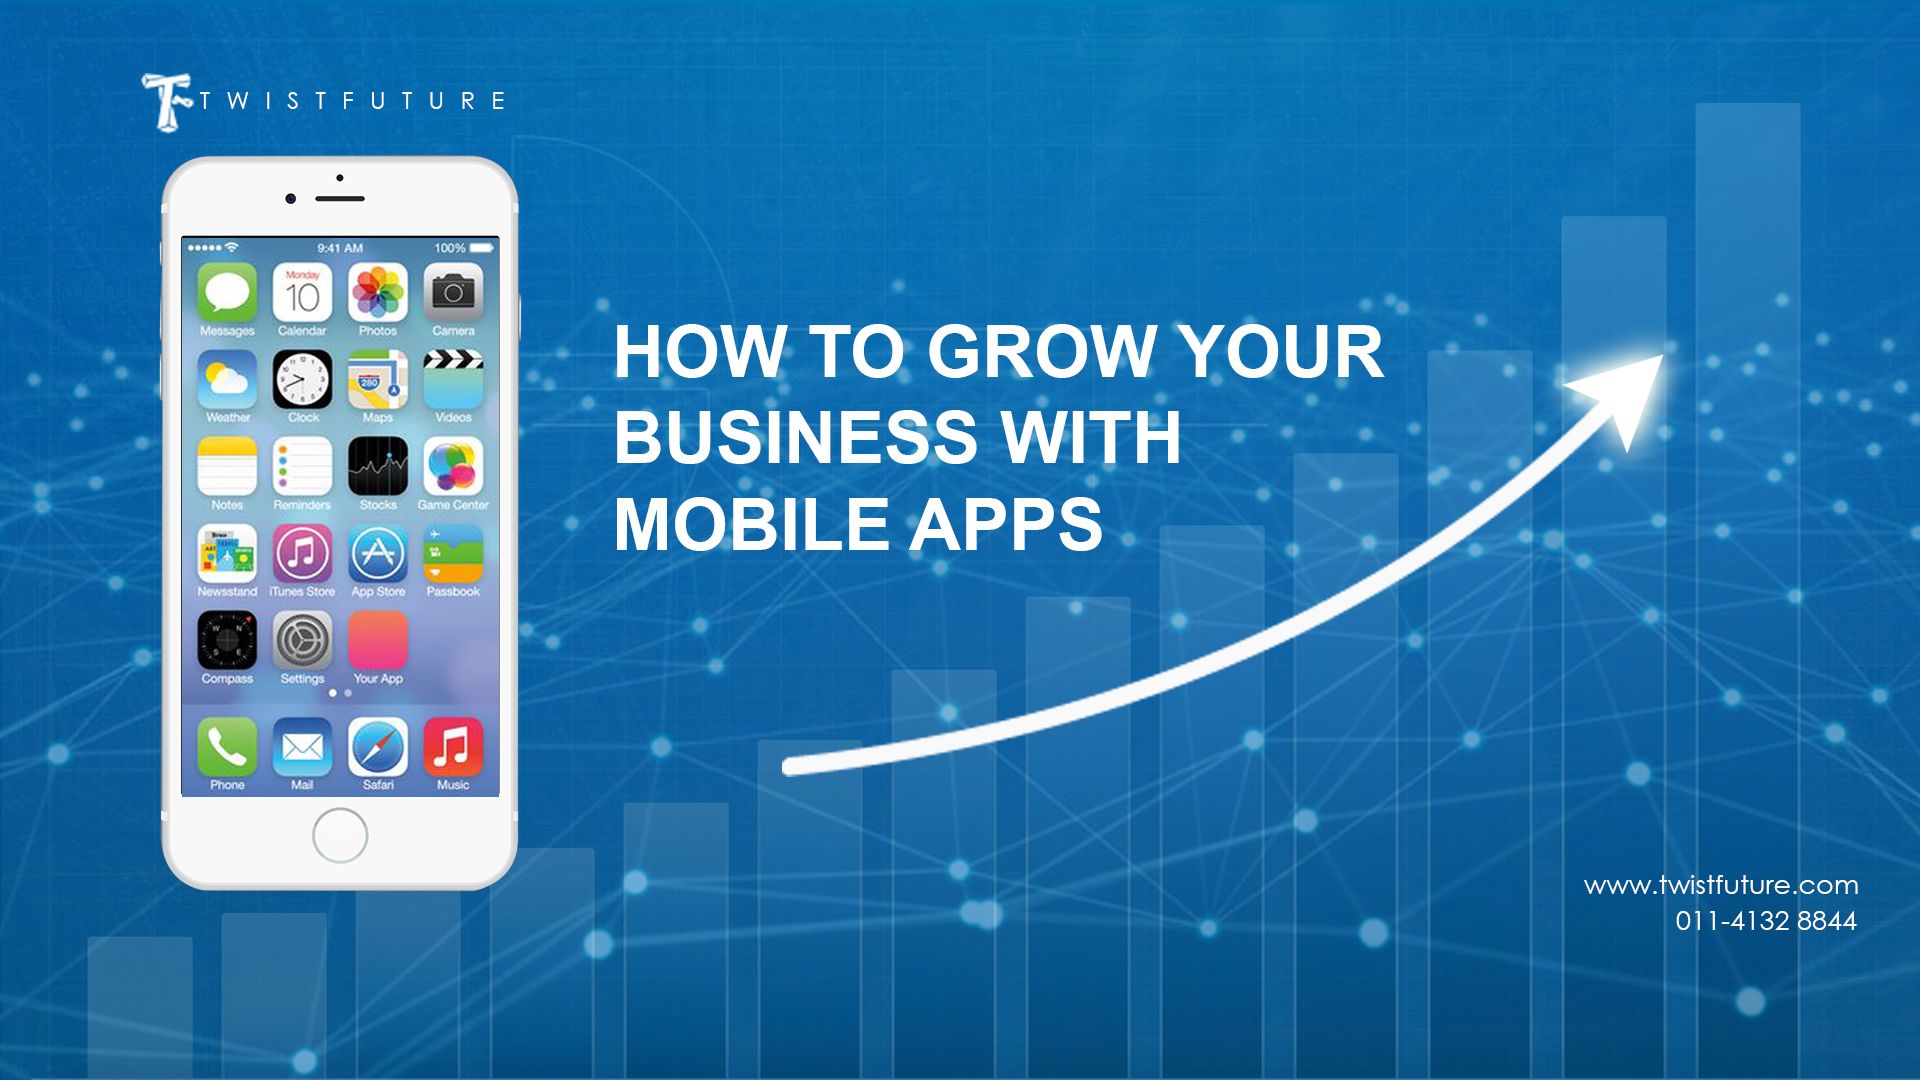 3. The Benefits of a Custom-Built Mobile App for Your Business